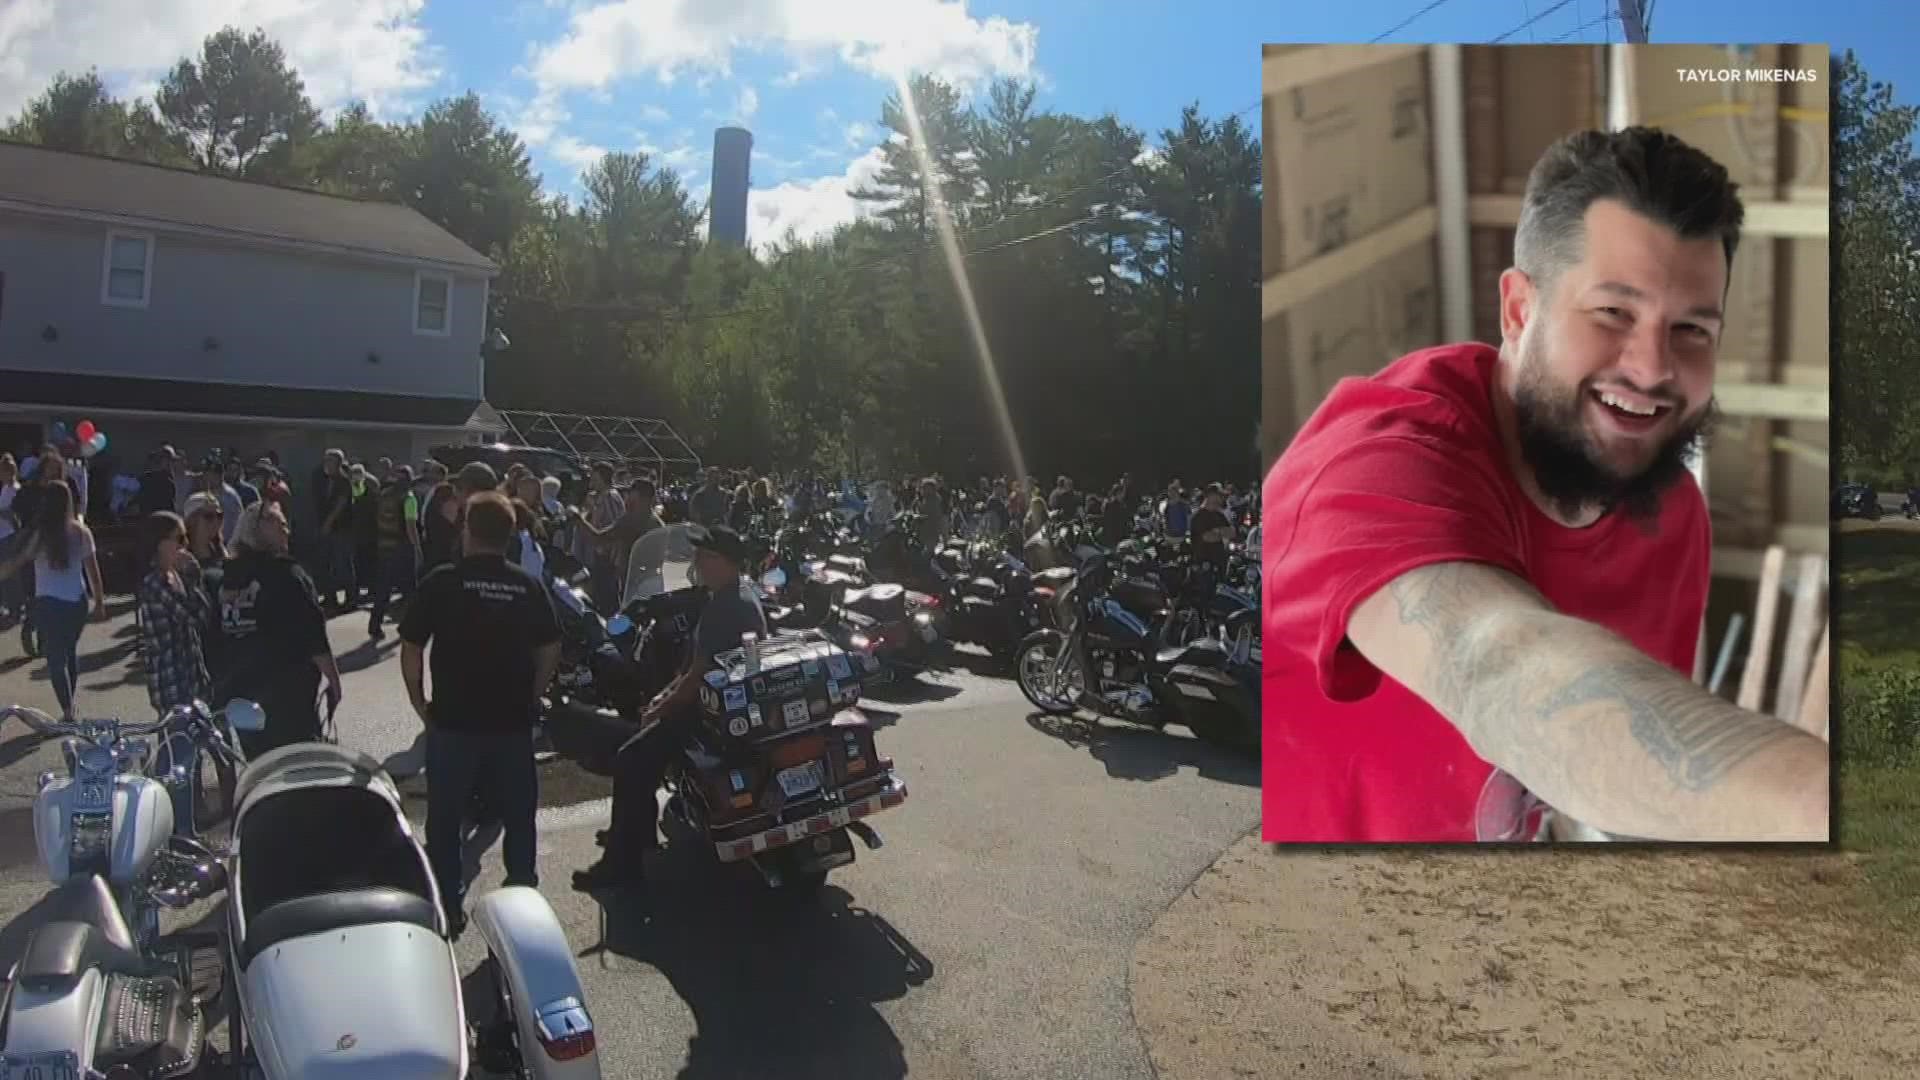 On Sunday, more than 400 motorcyclists rode through Waterboro to honor 31-year-old Douglas Michaud Jr. who police say was shot and killed earlier this month.